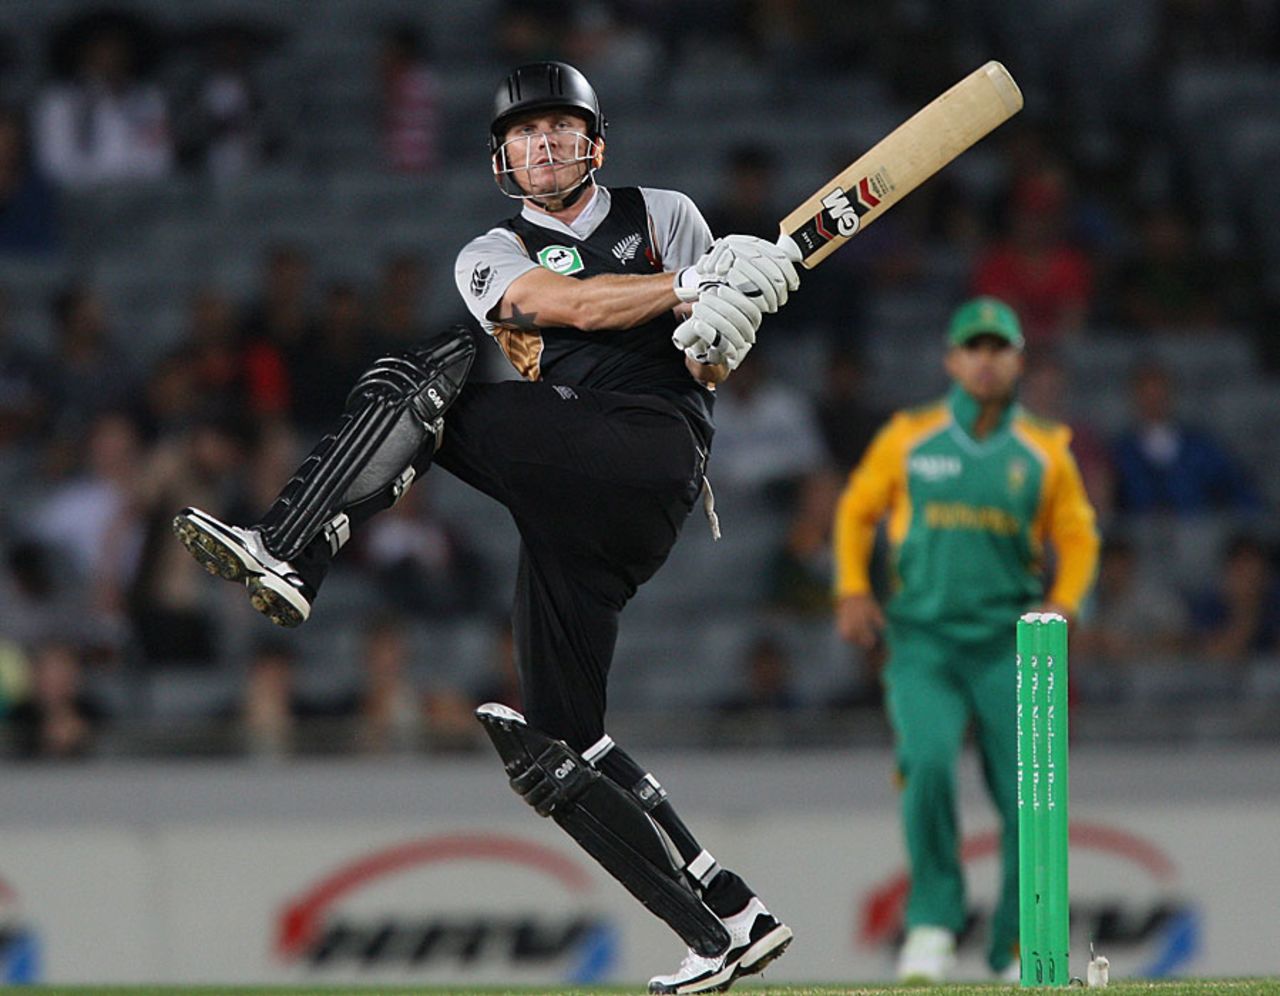 Rob Nicol got the chase off to a quick start, New Zealand v South Africa, 3rd Twenty20, Auckland, February 22, 2012